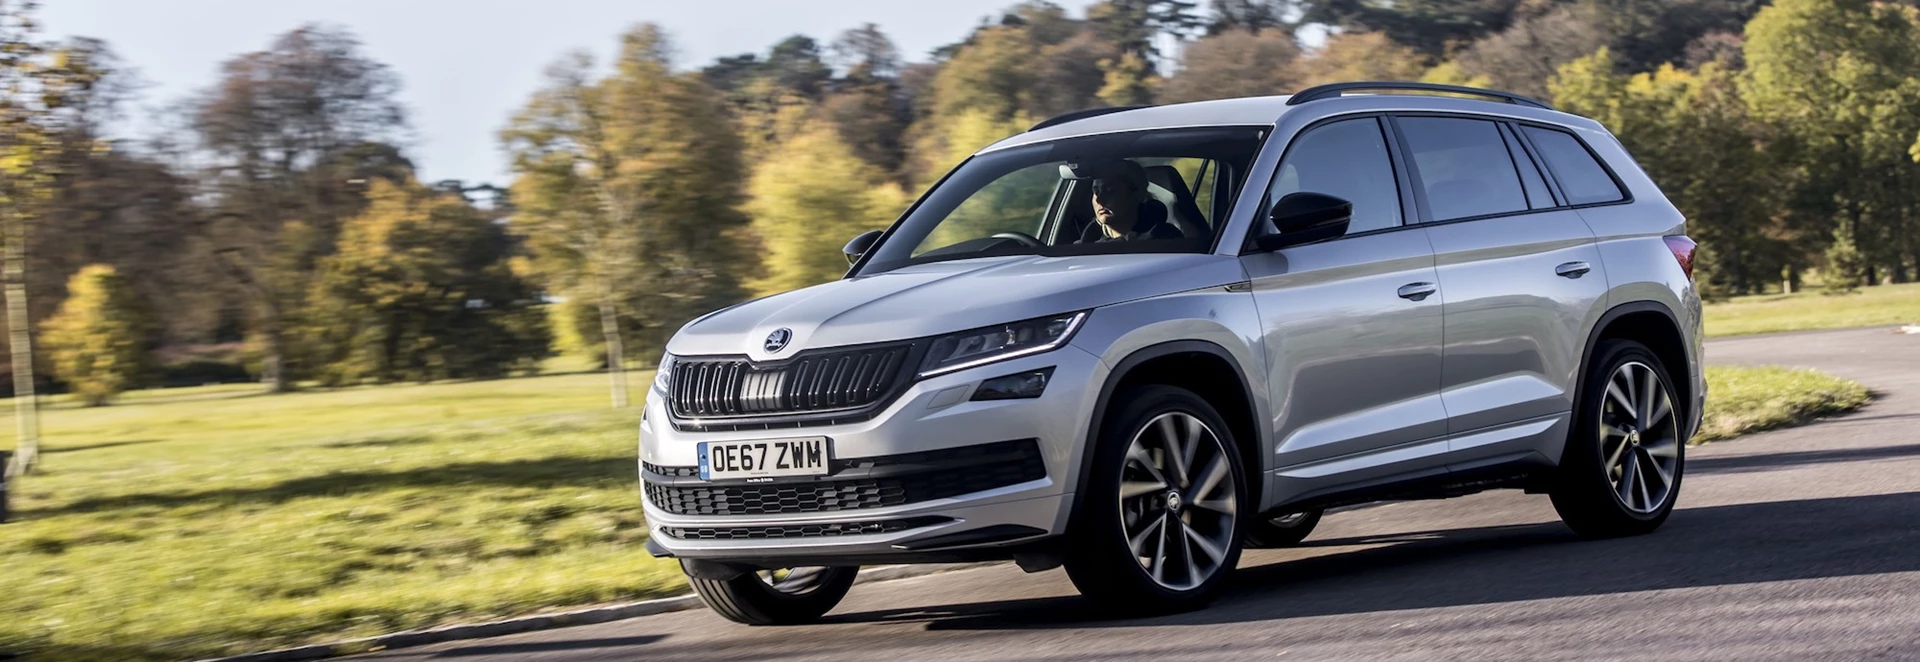 What makes Skoda SUVs so popular with car buyers?